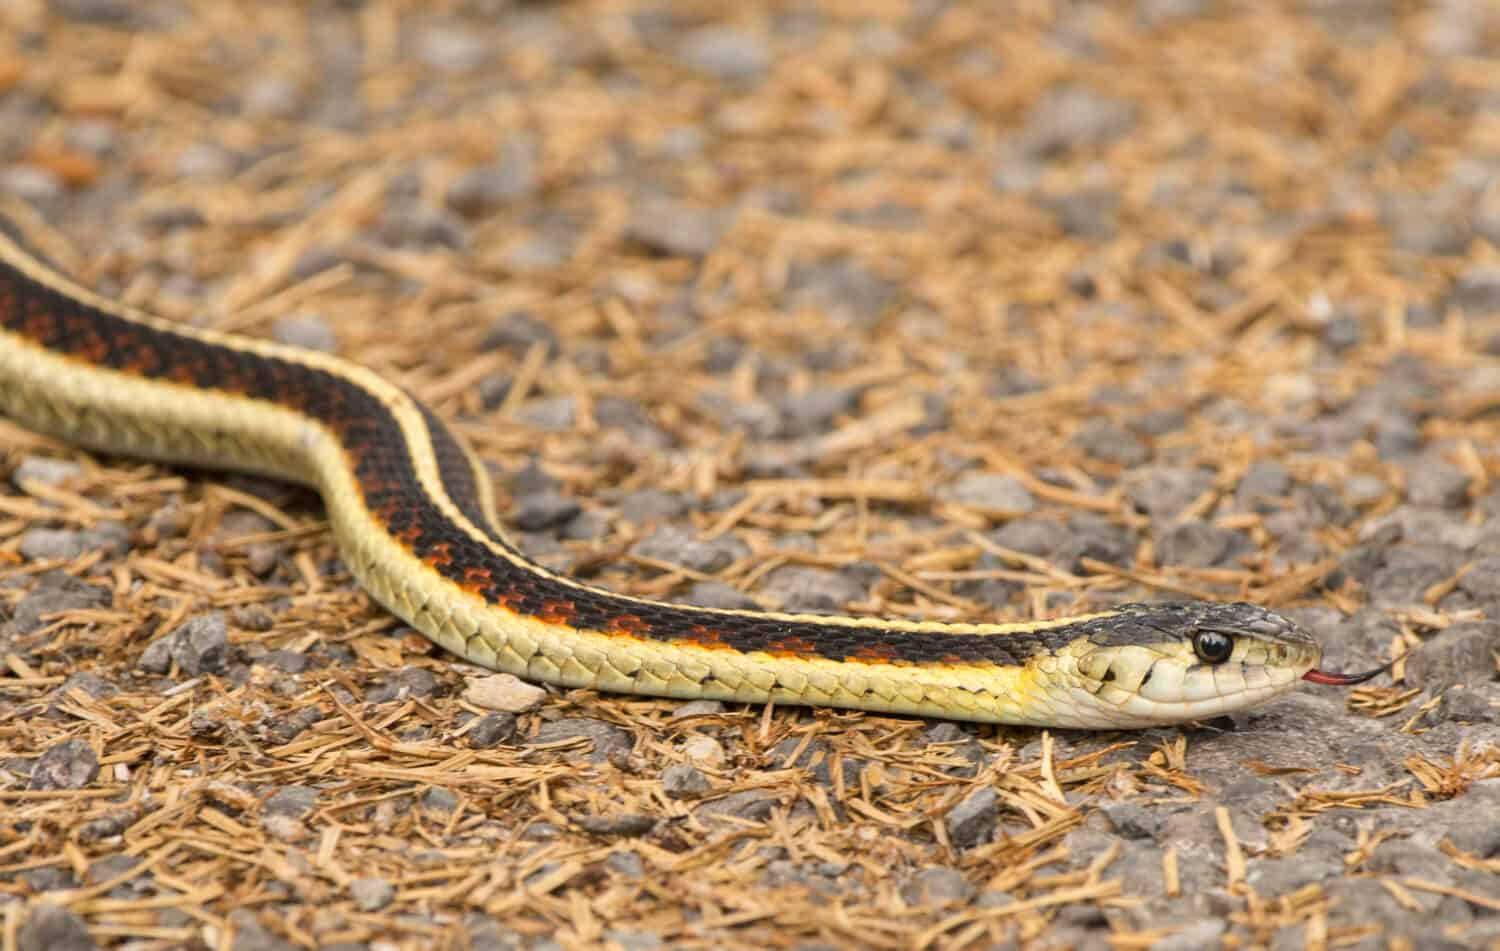 Valley Garter Snake (Thamnophis sirtalis fitchi) slithering across a country road